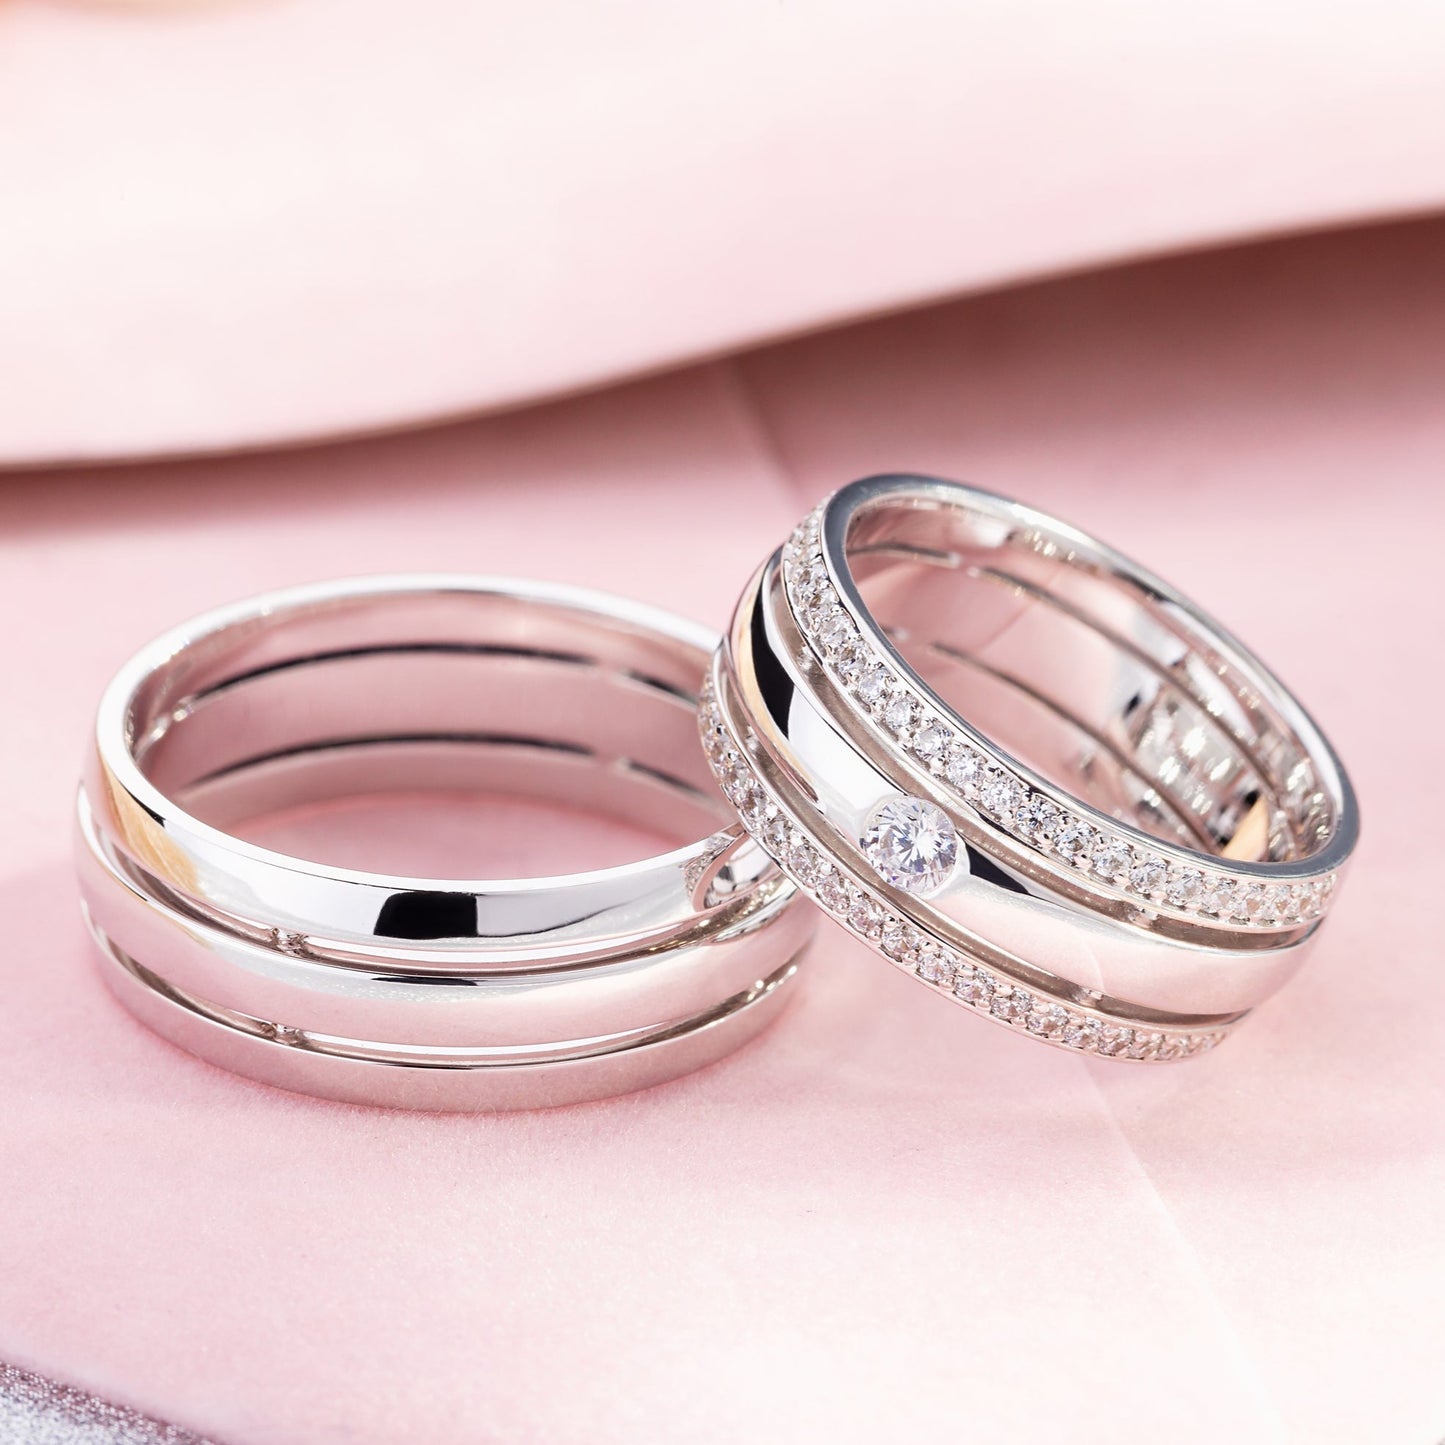 unique wedding bands set his and hers. wedding bands matching. gold wedding bands with diamonds. Wide wedding rings.